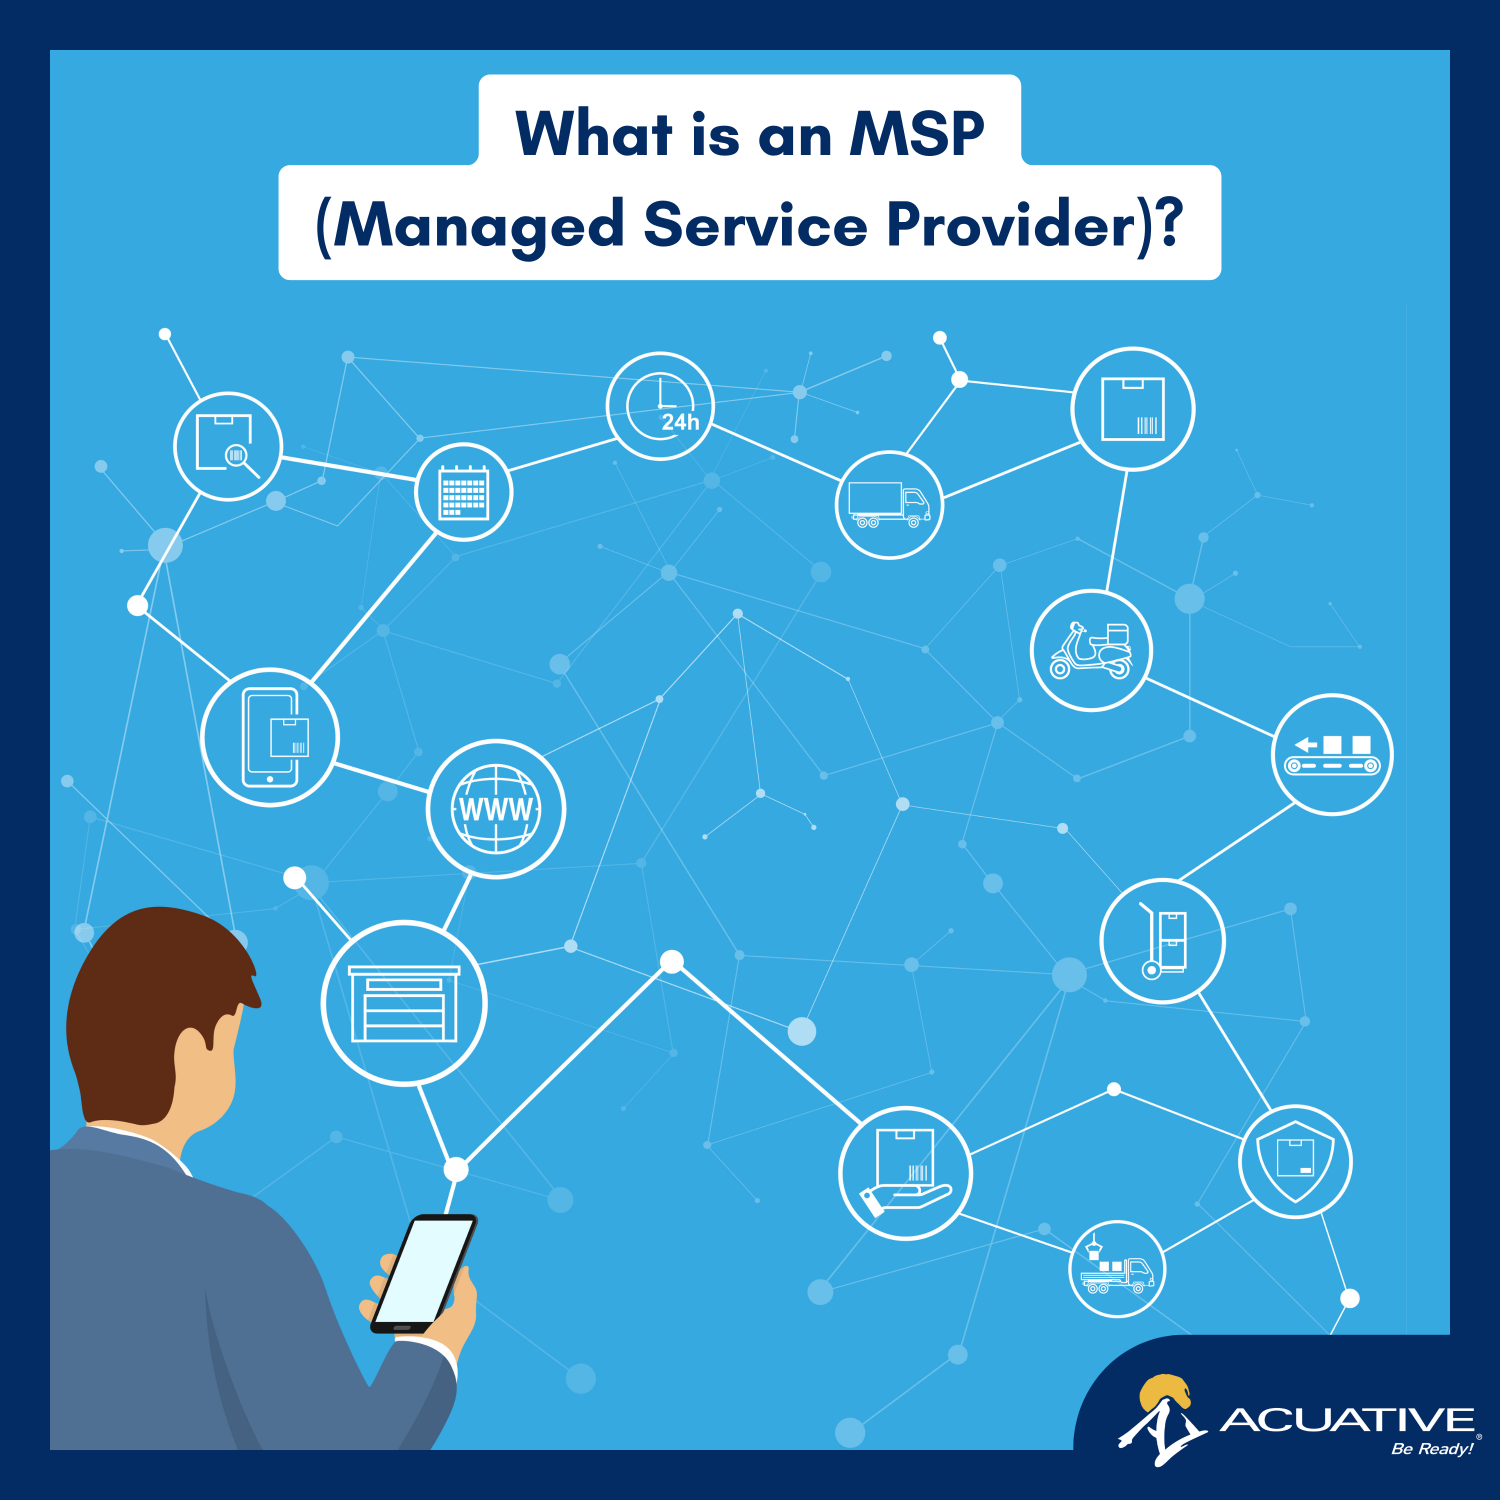 What is an MSP?